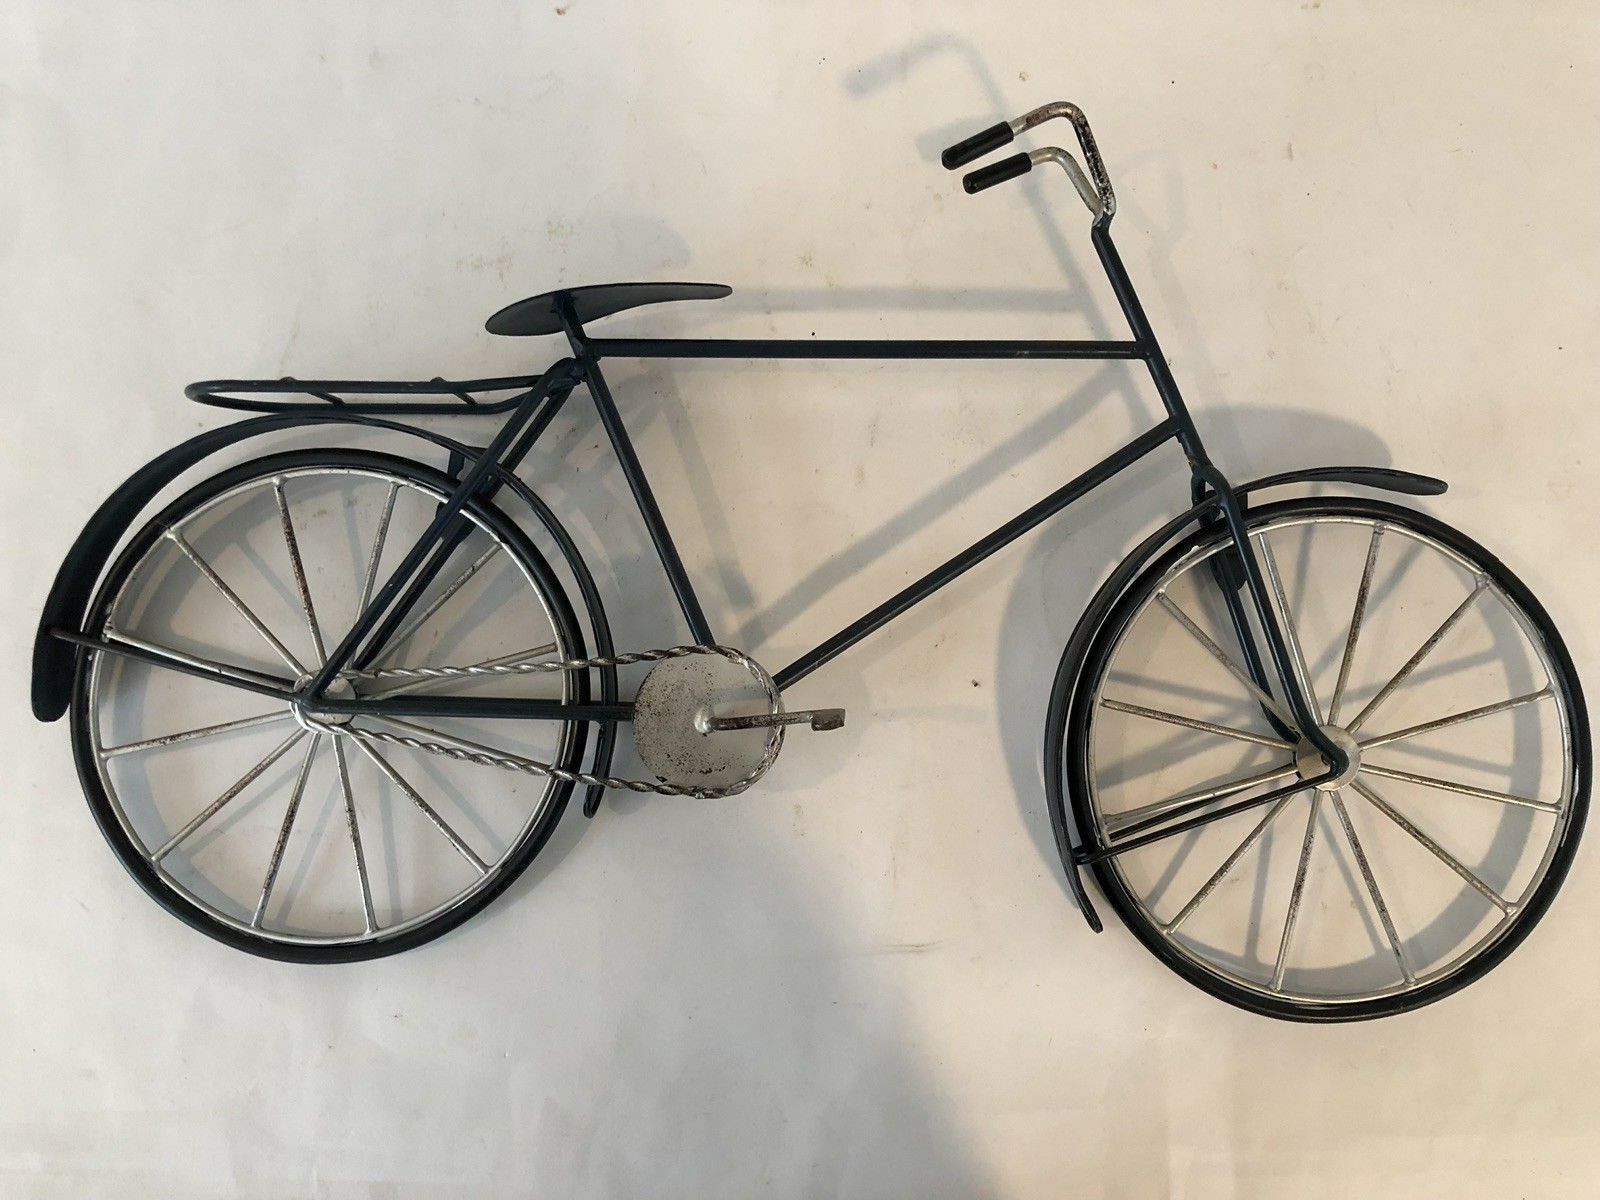 Metal Bicycle Wall Art Decor, Bicycle/ Bike Sculpture 20"w X 12"h Pertaining To Bike Wall Decor (View 12 of 30)